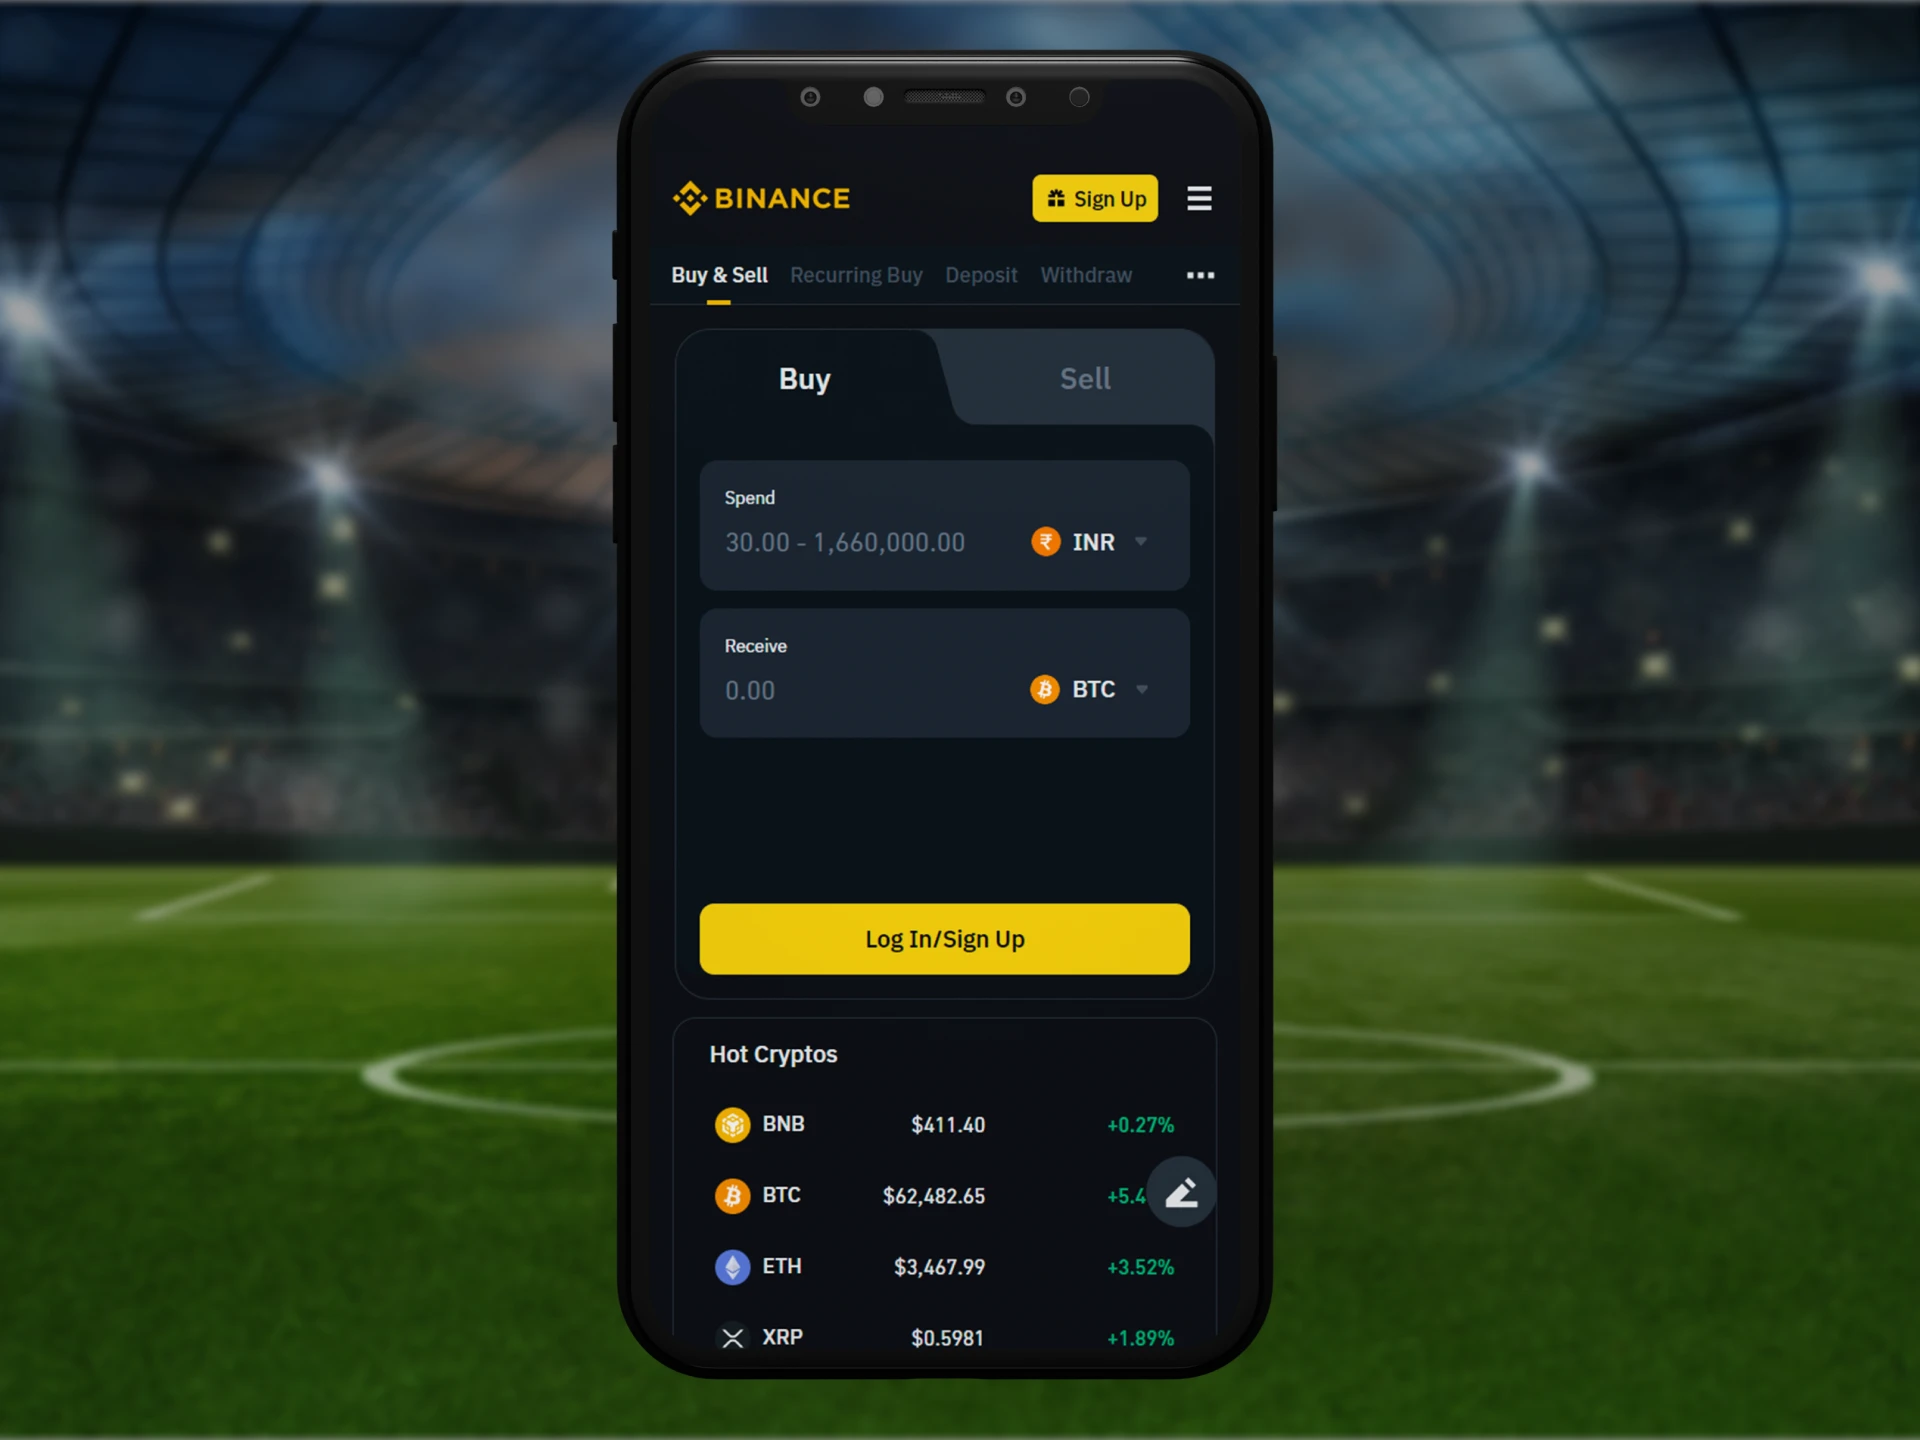 Before betting on sports, buy cryptocurrency from a reliable exchange platform.